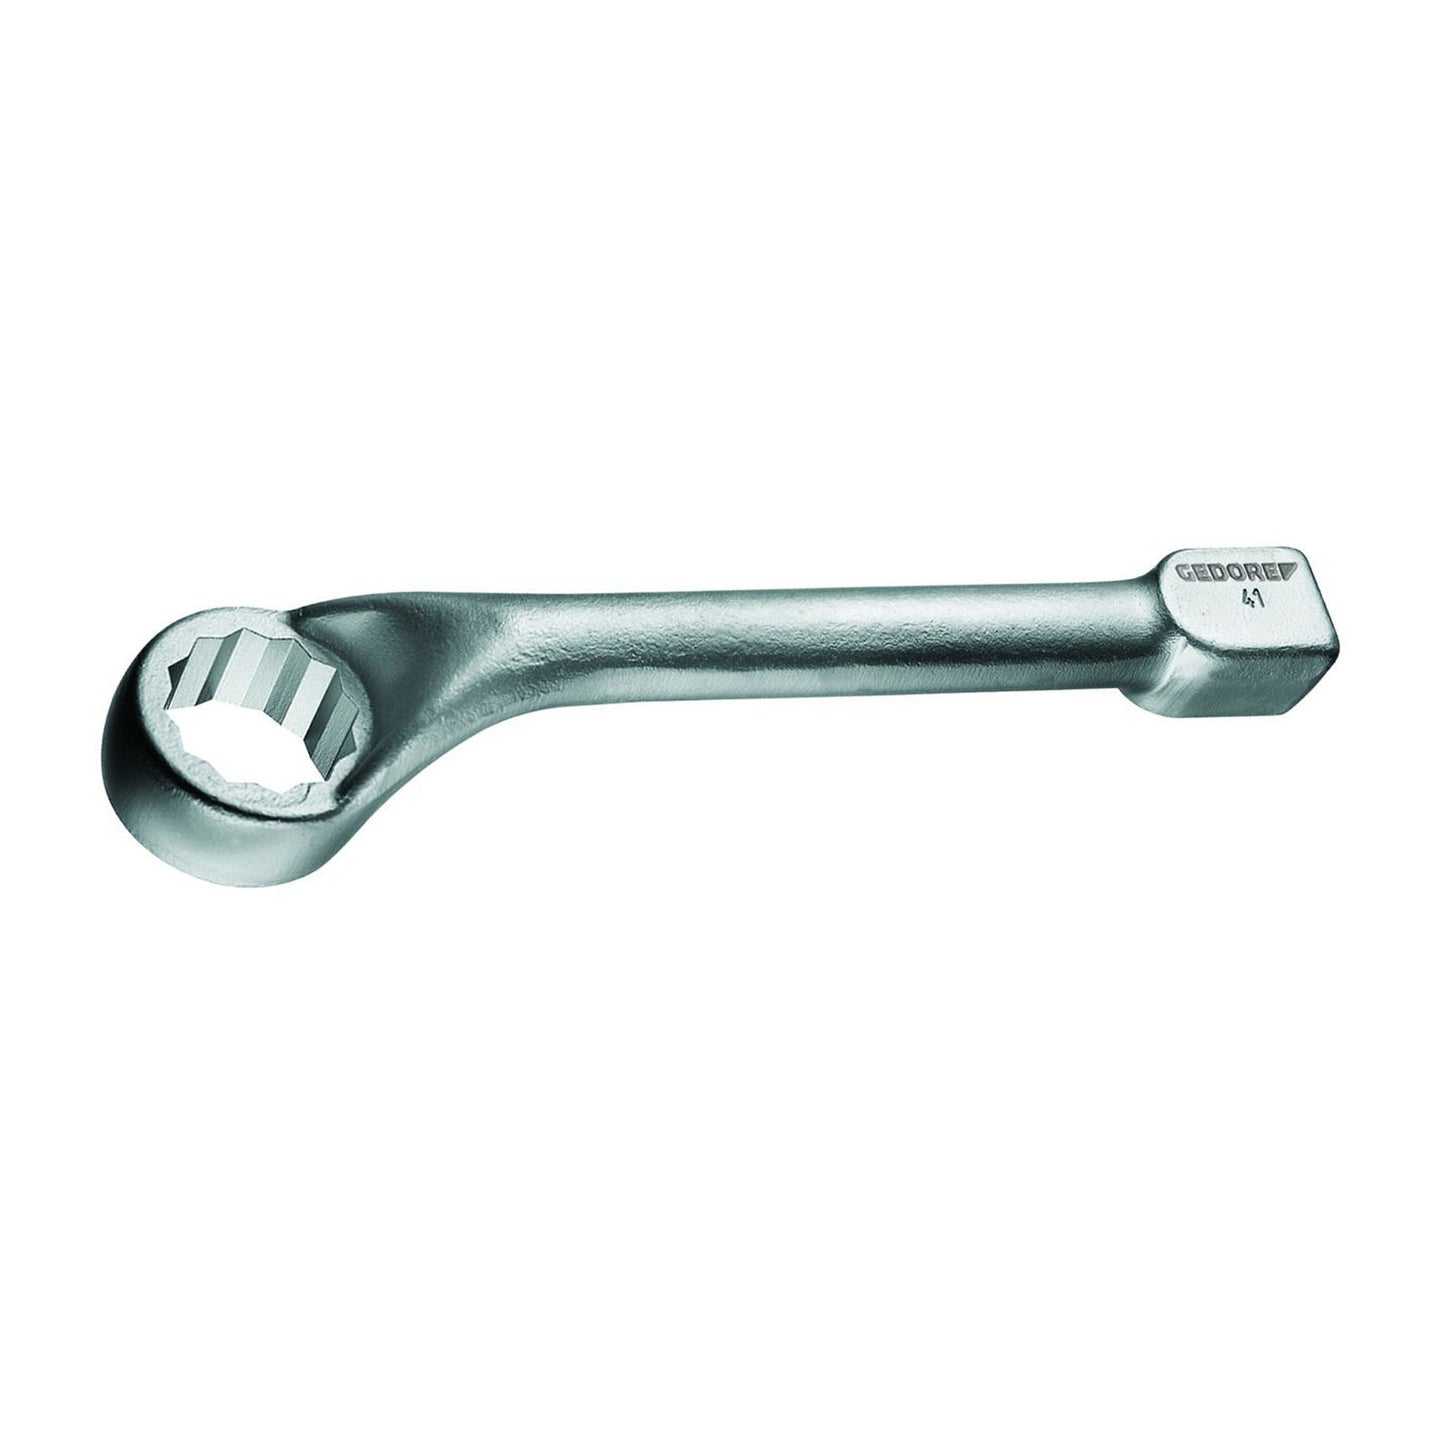 GEDORE 306 G 80 - Offset Wrench, 80mm (1416480)